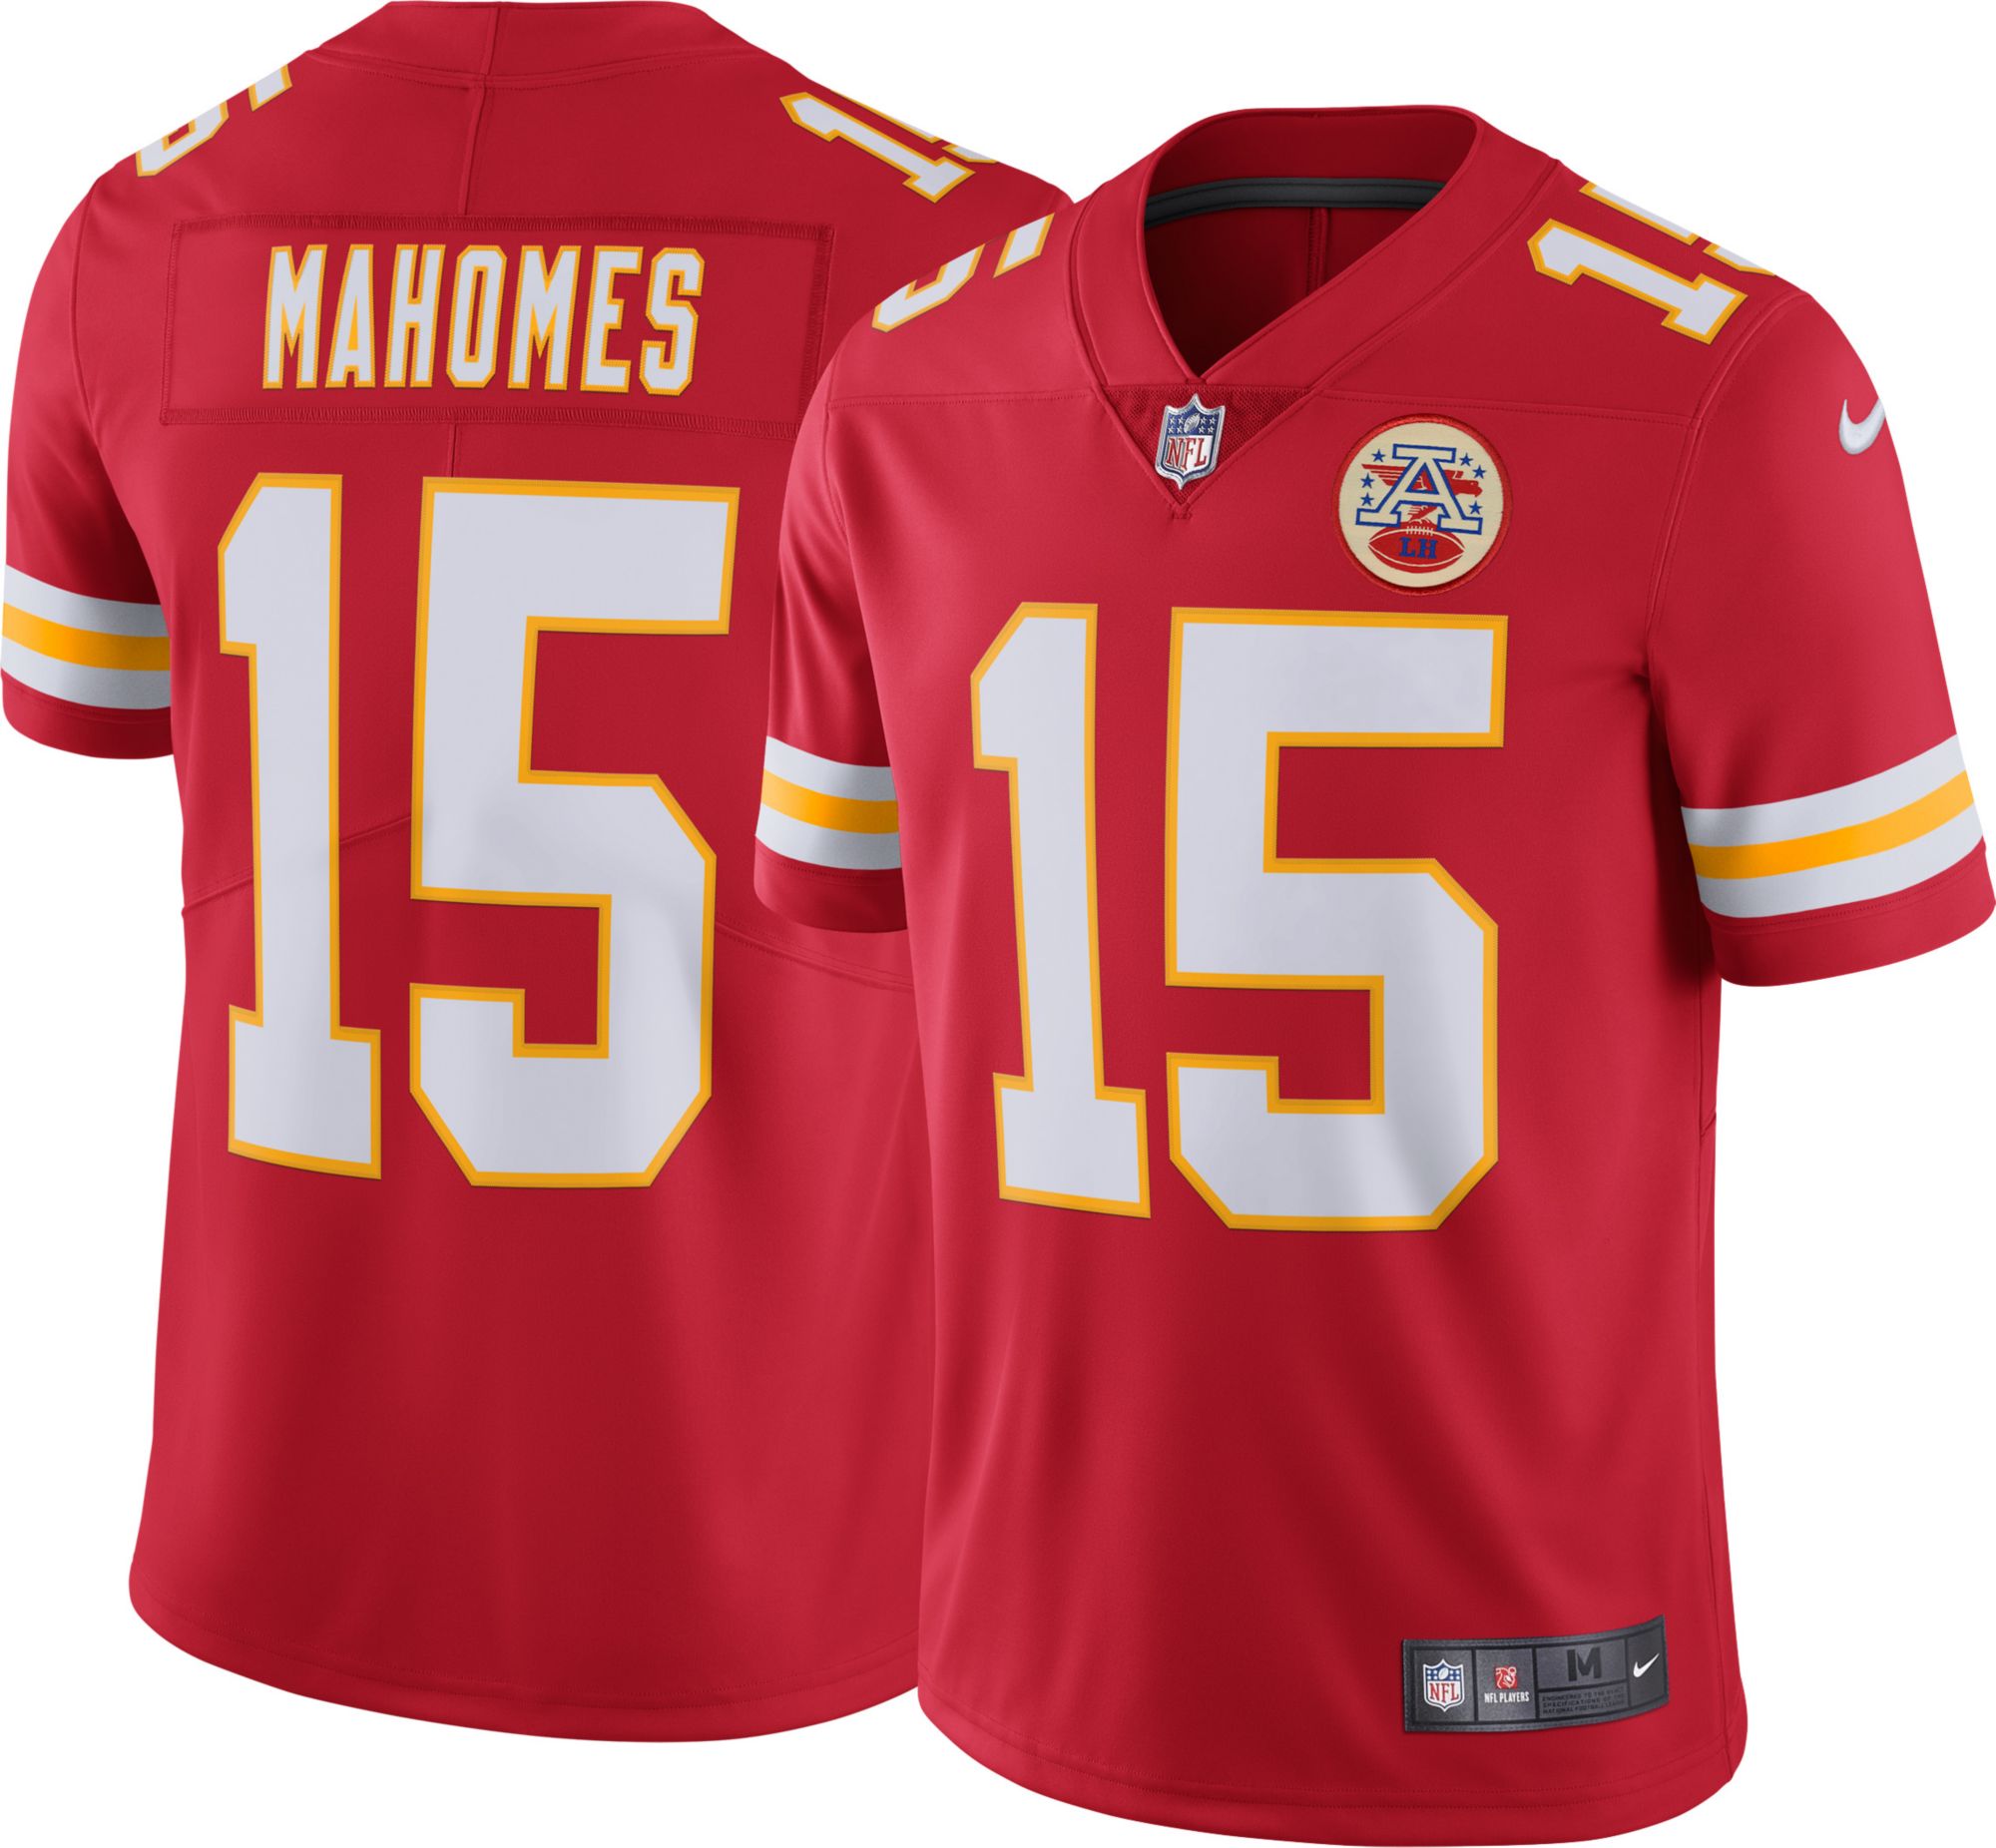 mahomes nike limited jersey